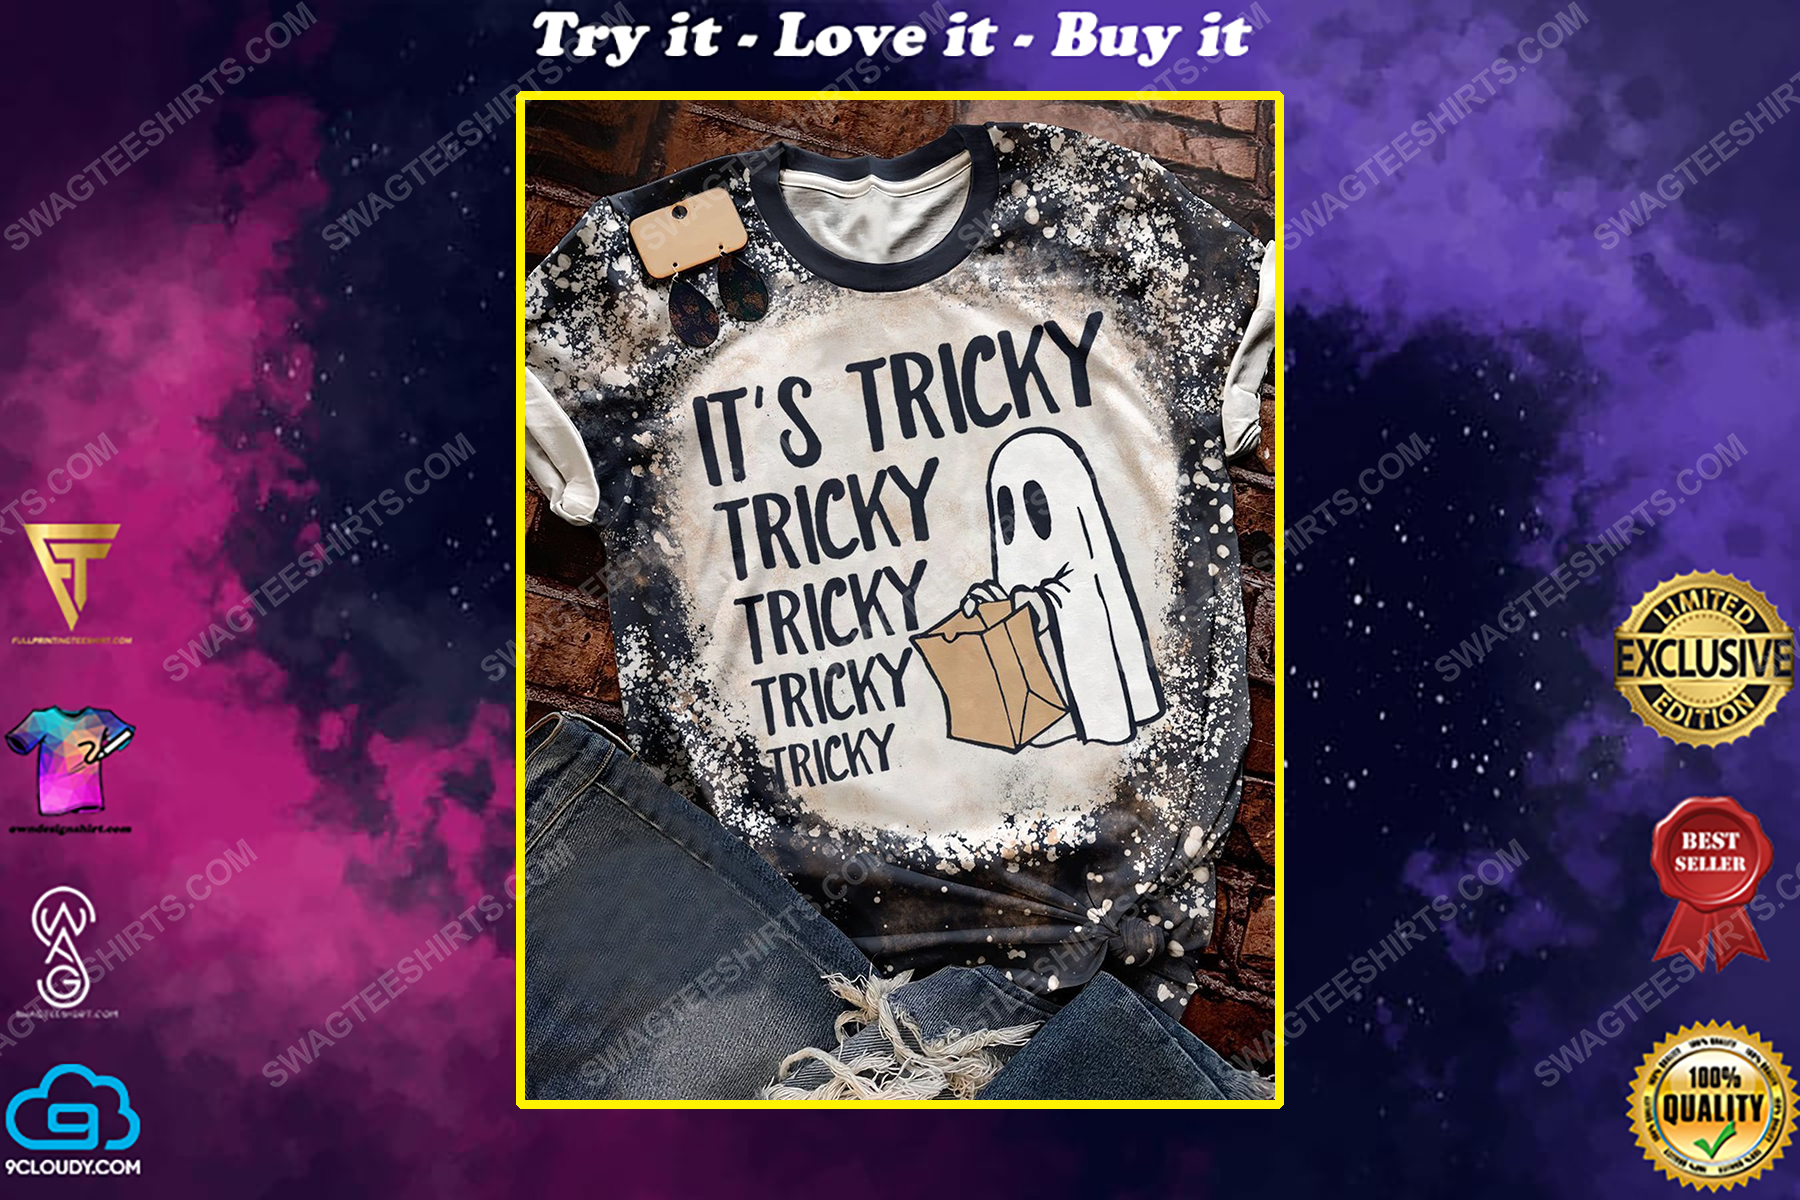 Halloween night and it's tricky ghost bleached shirt